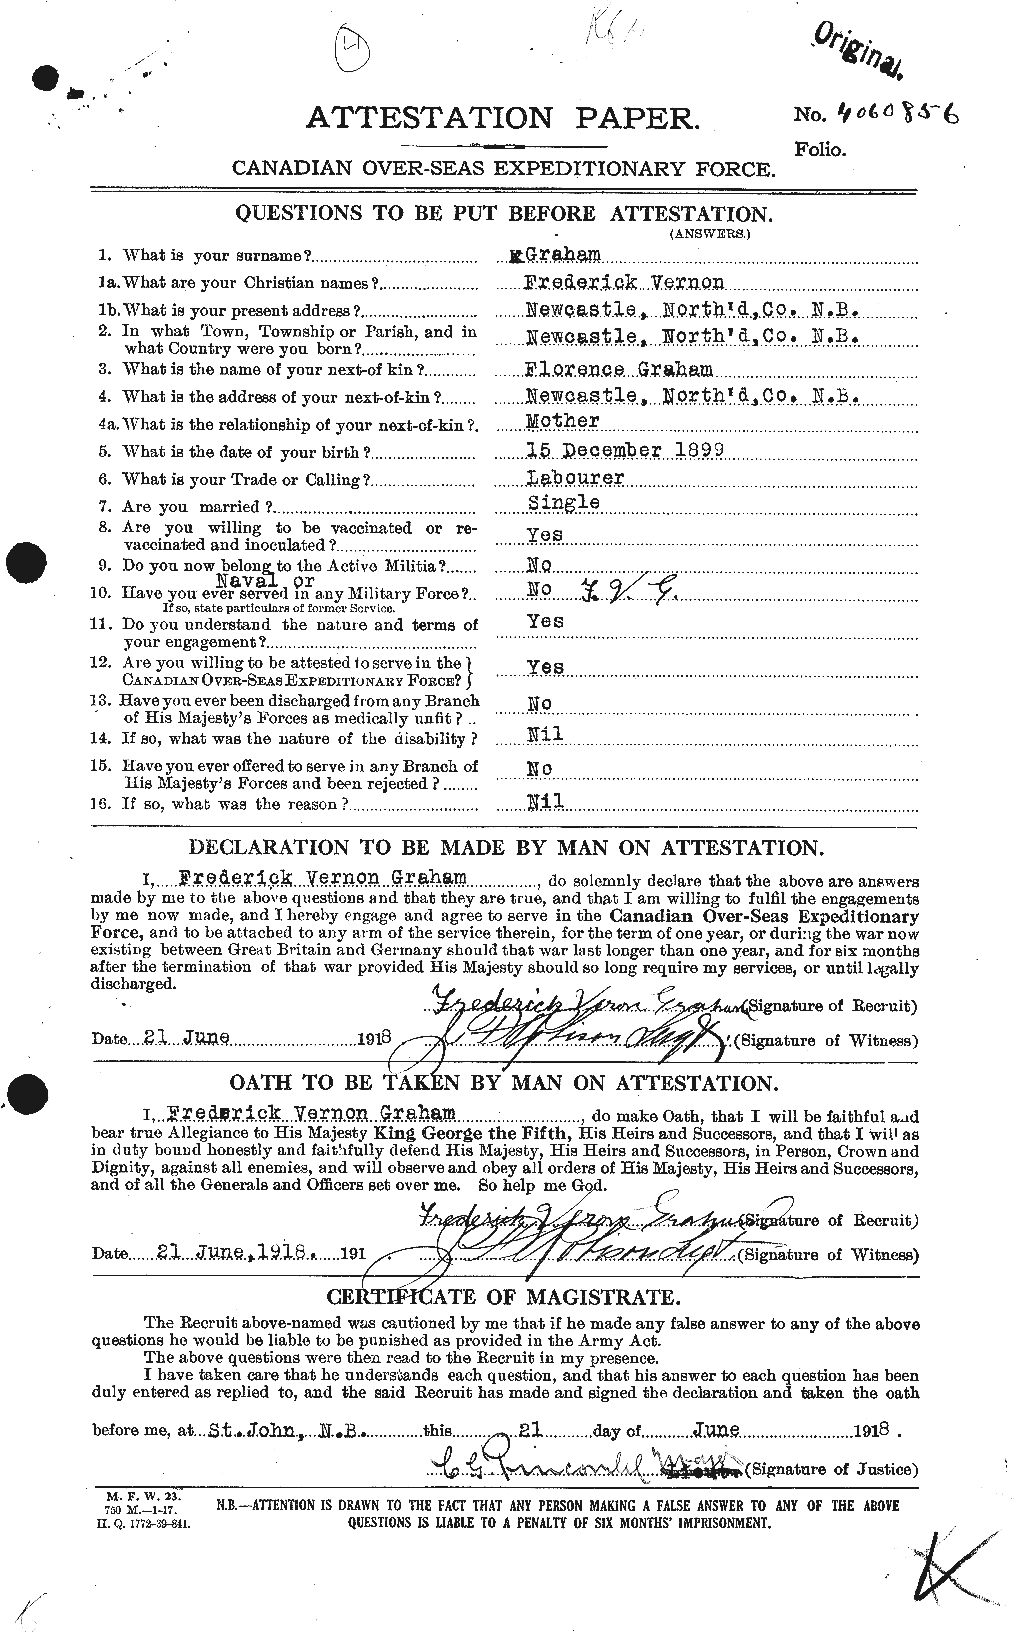 Personnel Records of the First World War - CEF 357619a